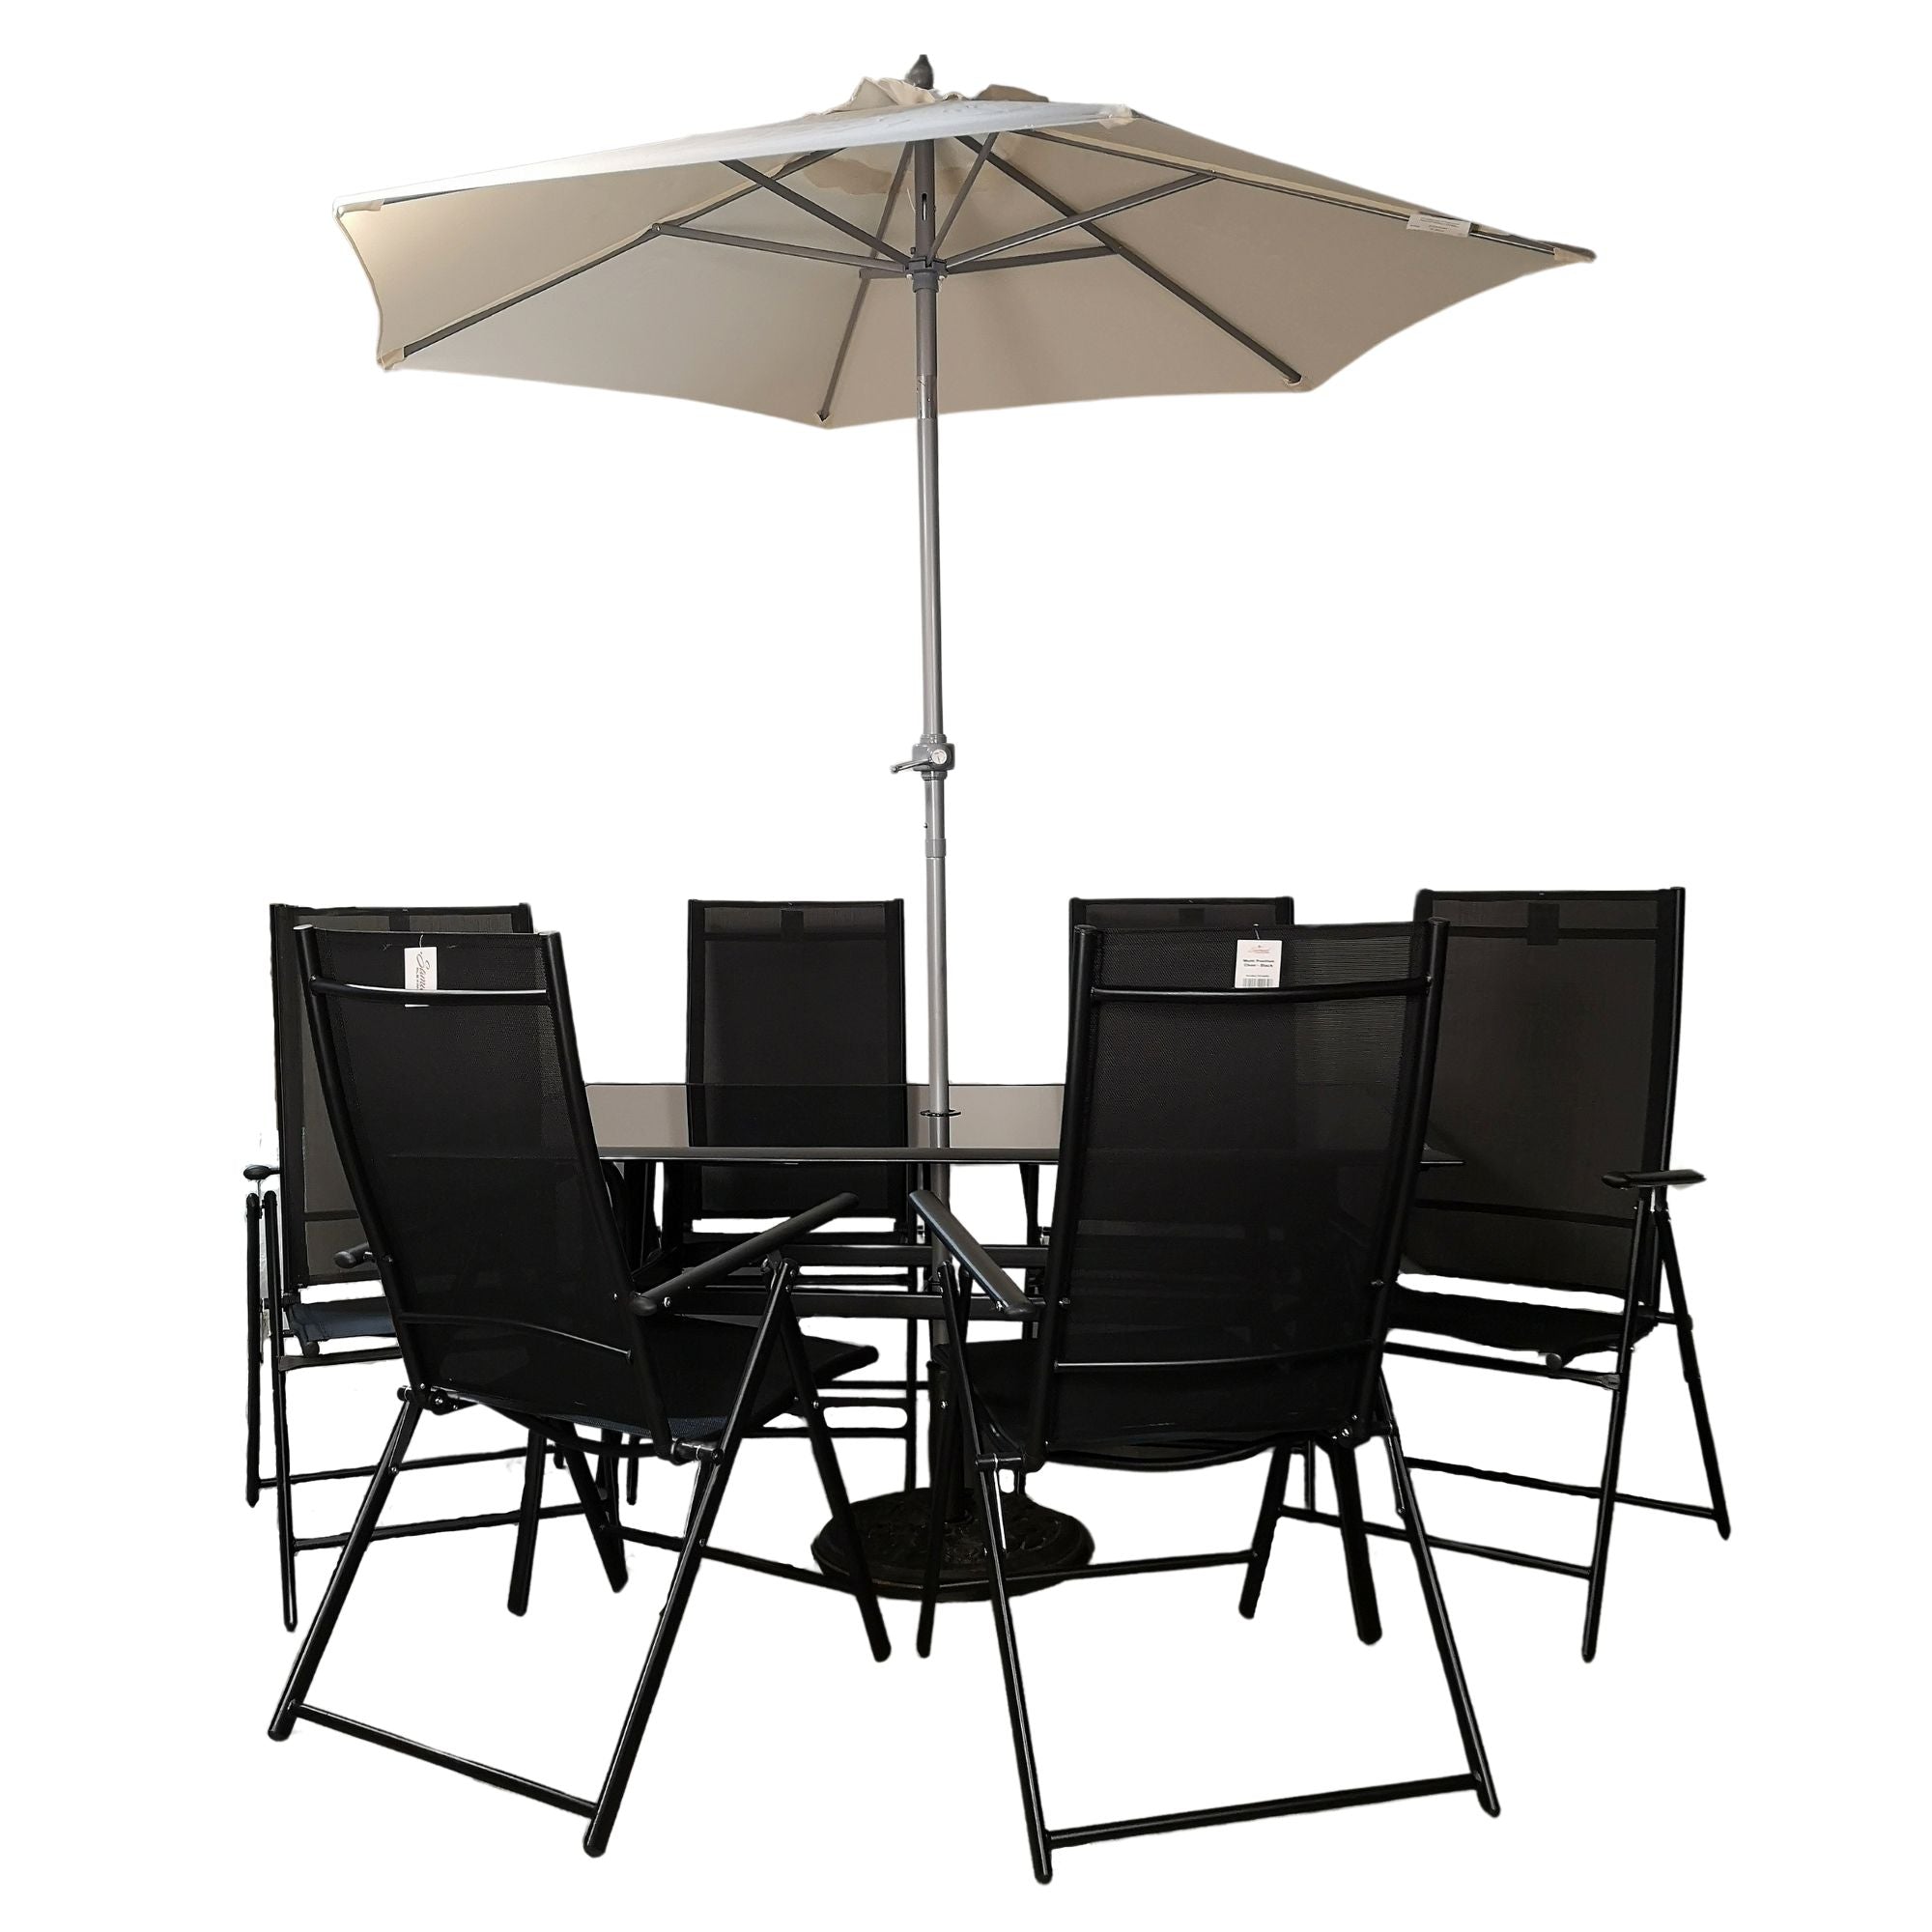 Outdoor 6 Person Rectangular Glass Top Garden Patio Dining Table Chairs With Cream Parasol and Base Set